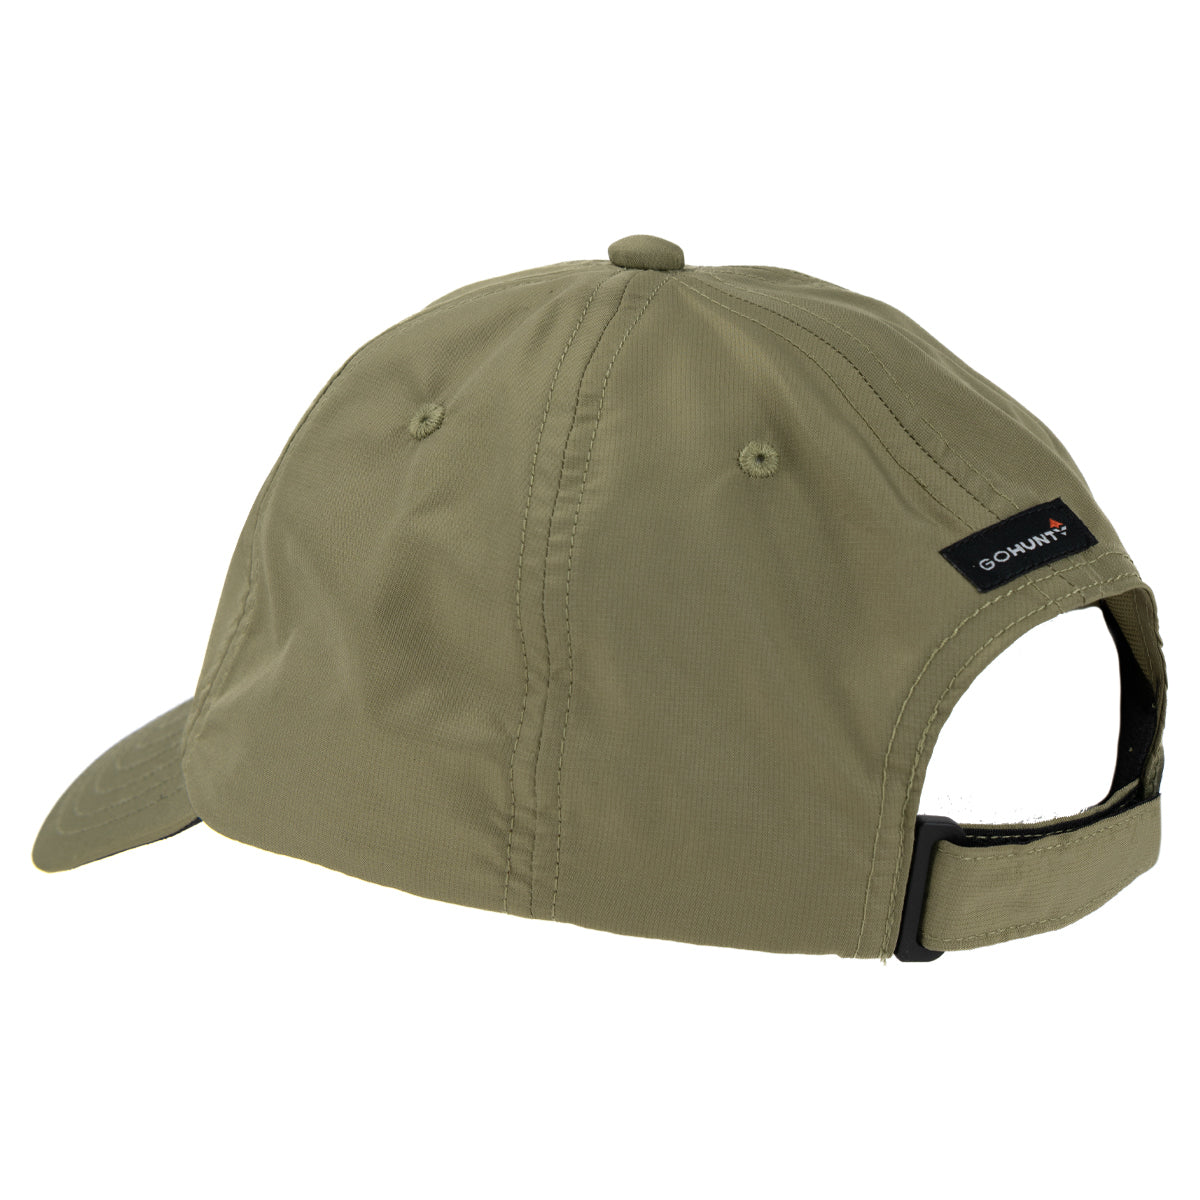 GOHUNT Tanner Hat in Olive by GOHUNT | GOHUNT - GOHUNT Shop